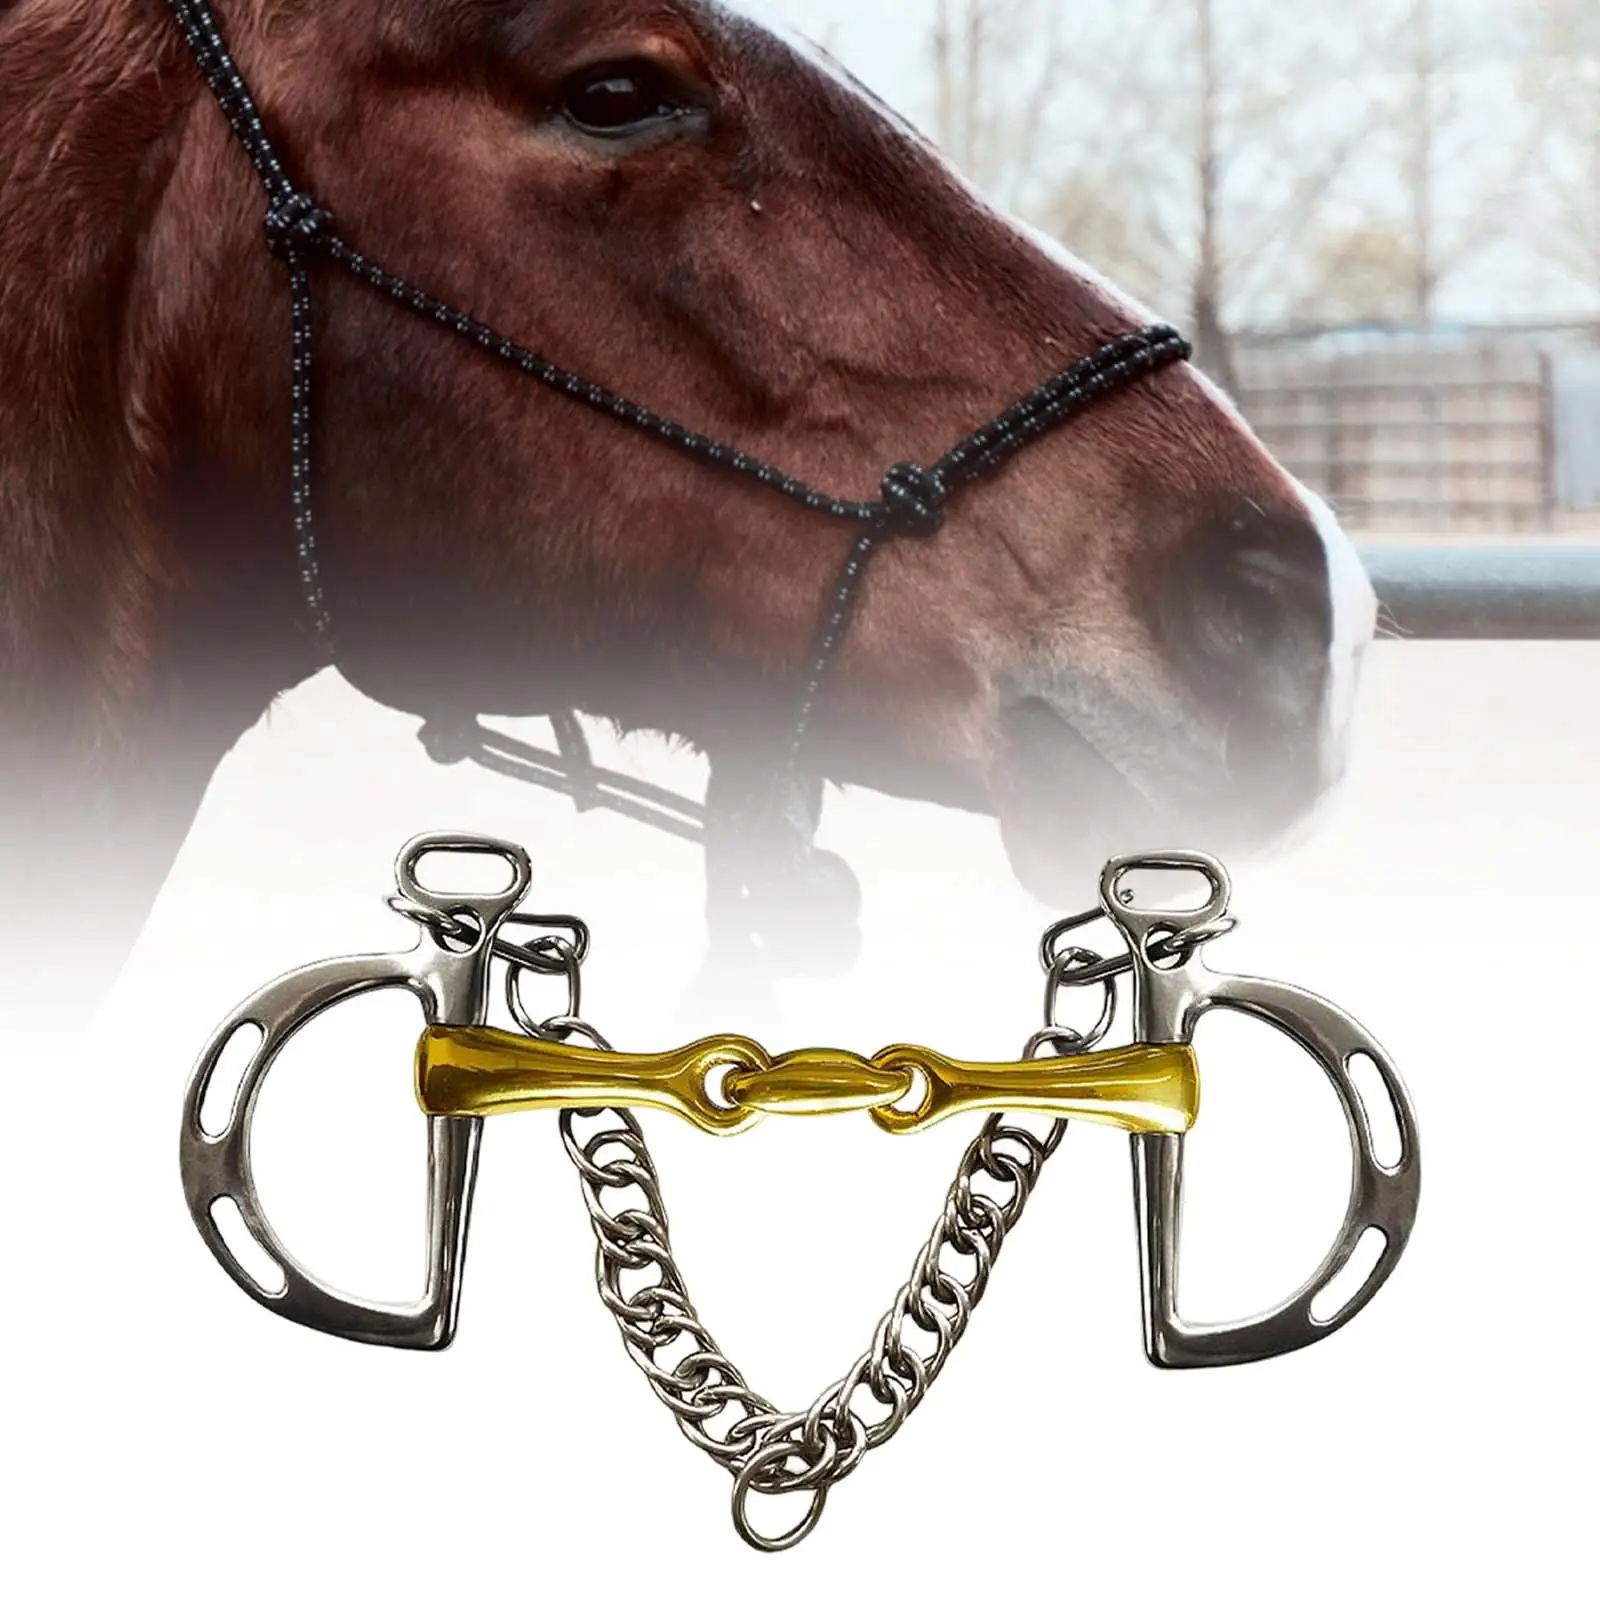 Horse Bit Copper Mouth Stainless Steel Training Equipment Horse Chewing